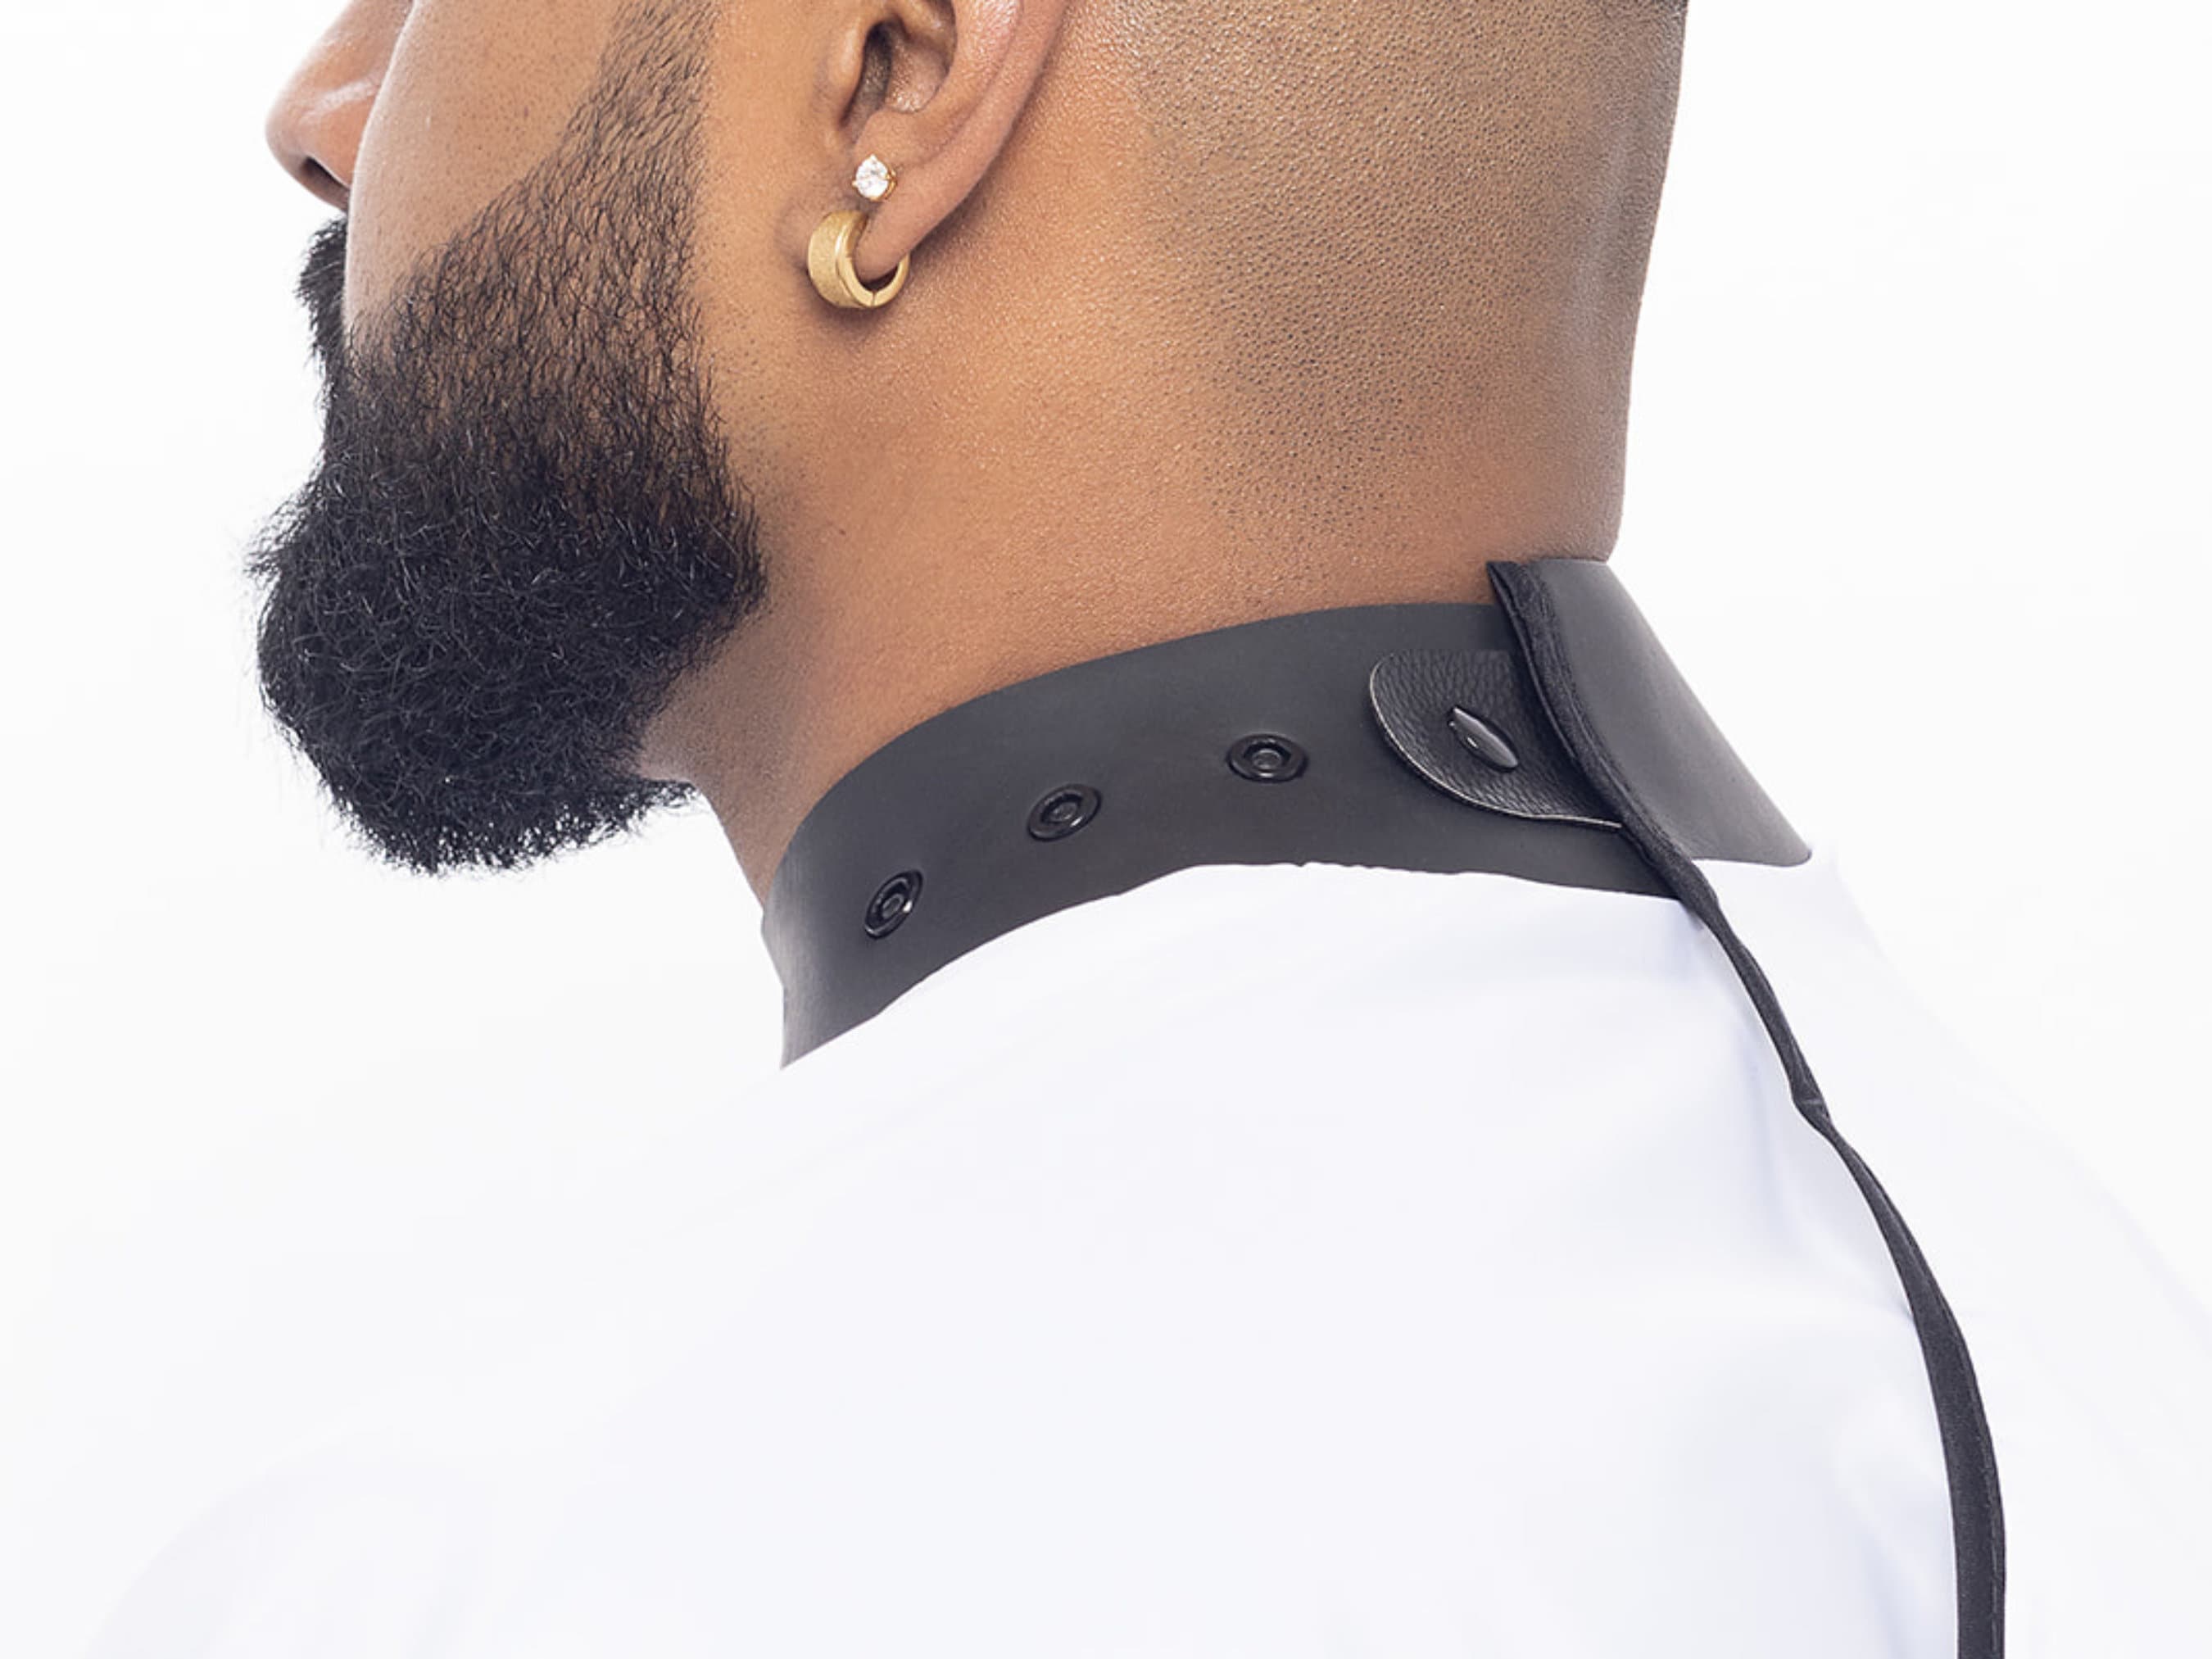 Full Collection Available Online DESIGNERBARBERCAPES.COM #barber #bar